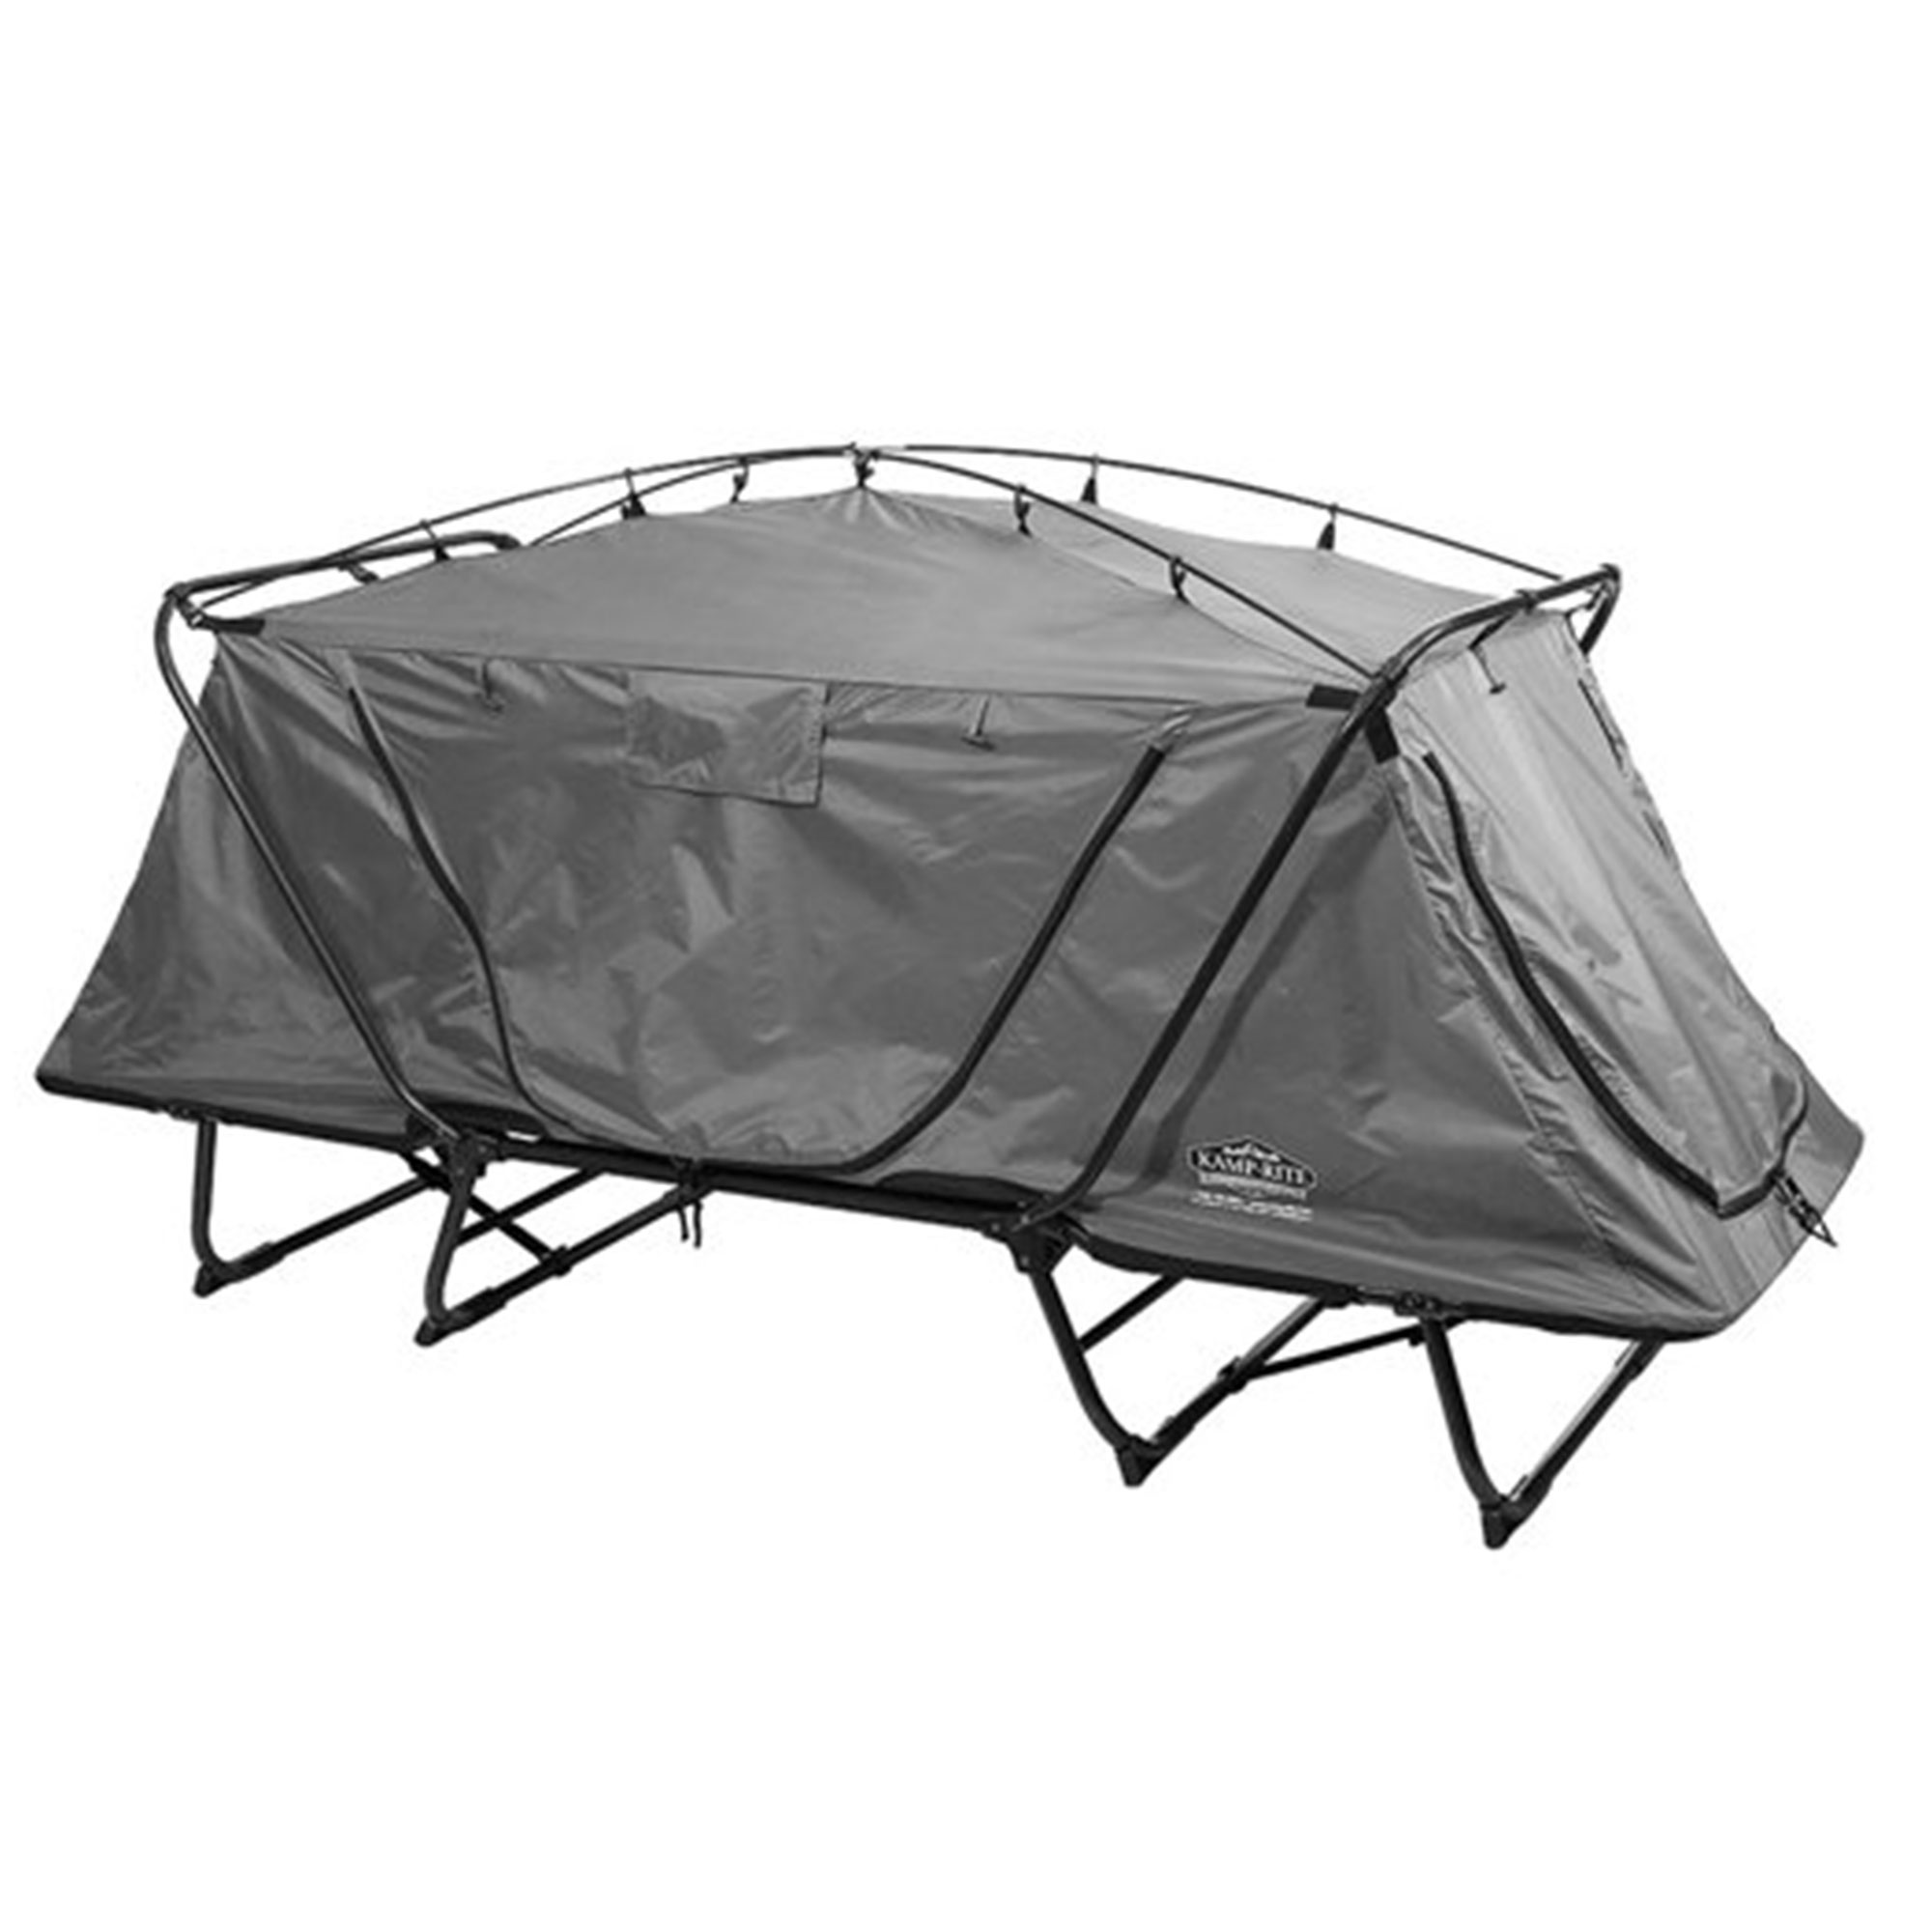 Kamp-Rite Oversized Quick Setup 1 Person Cot, Chair, & Tent w/Domed Top - image 4 of 8